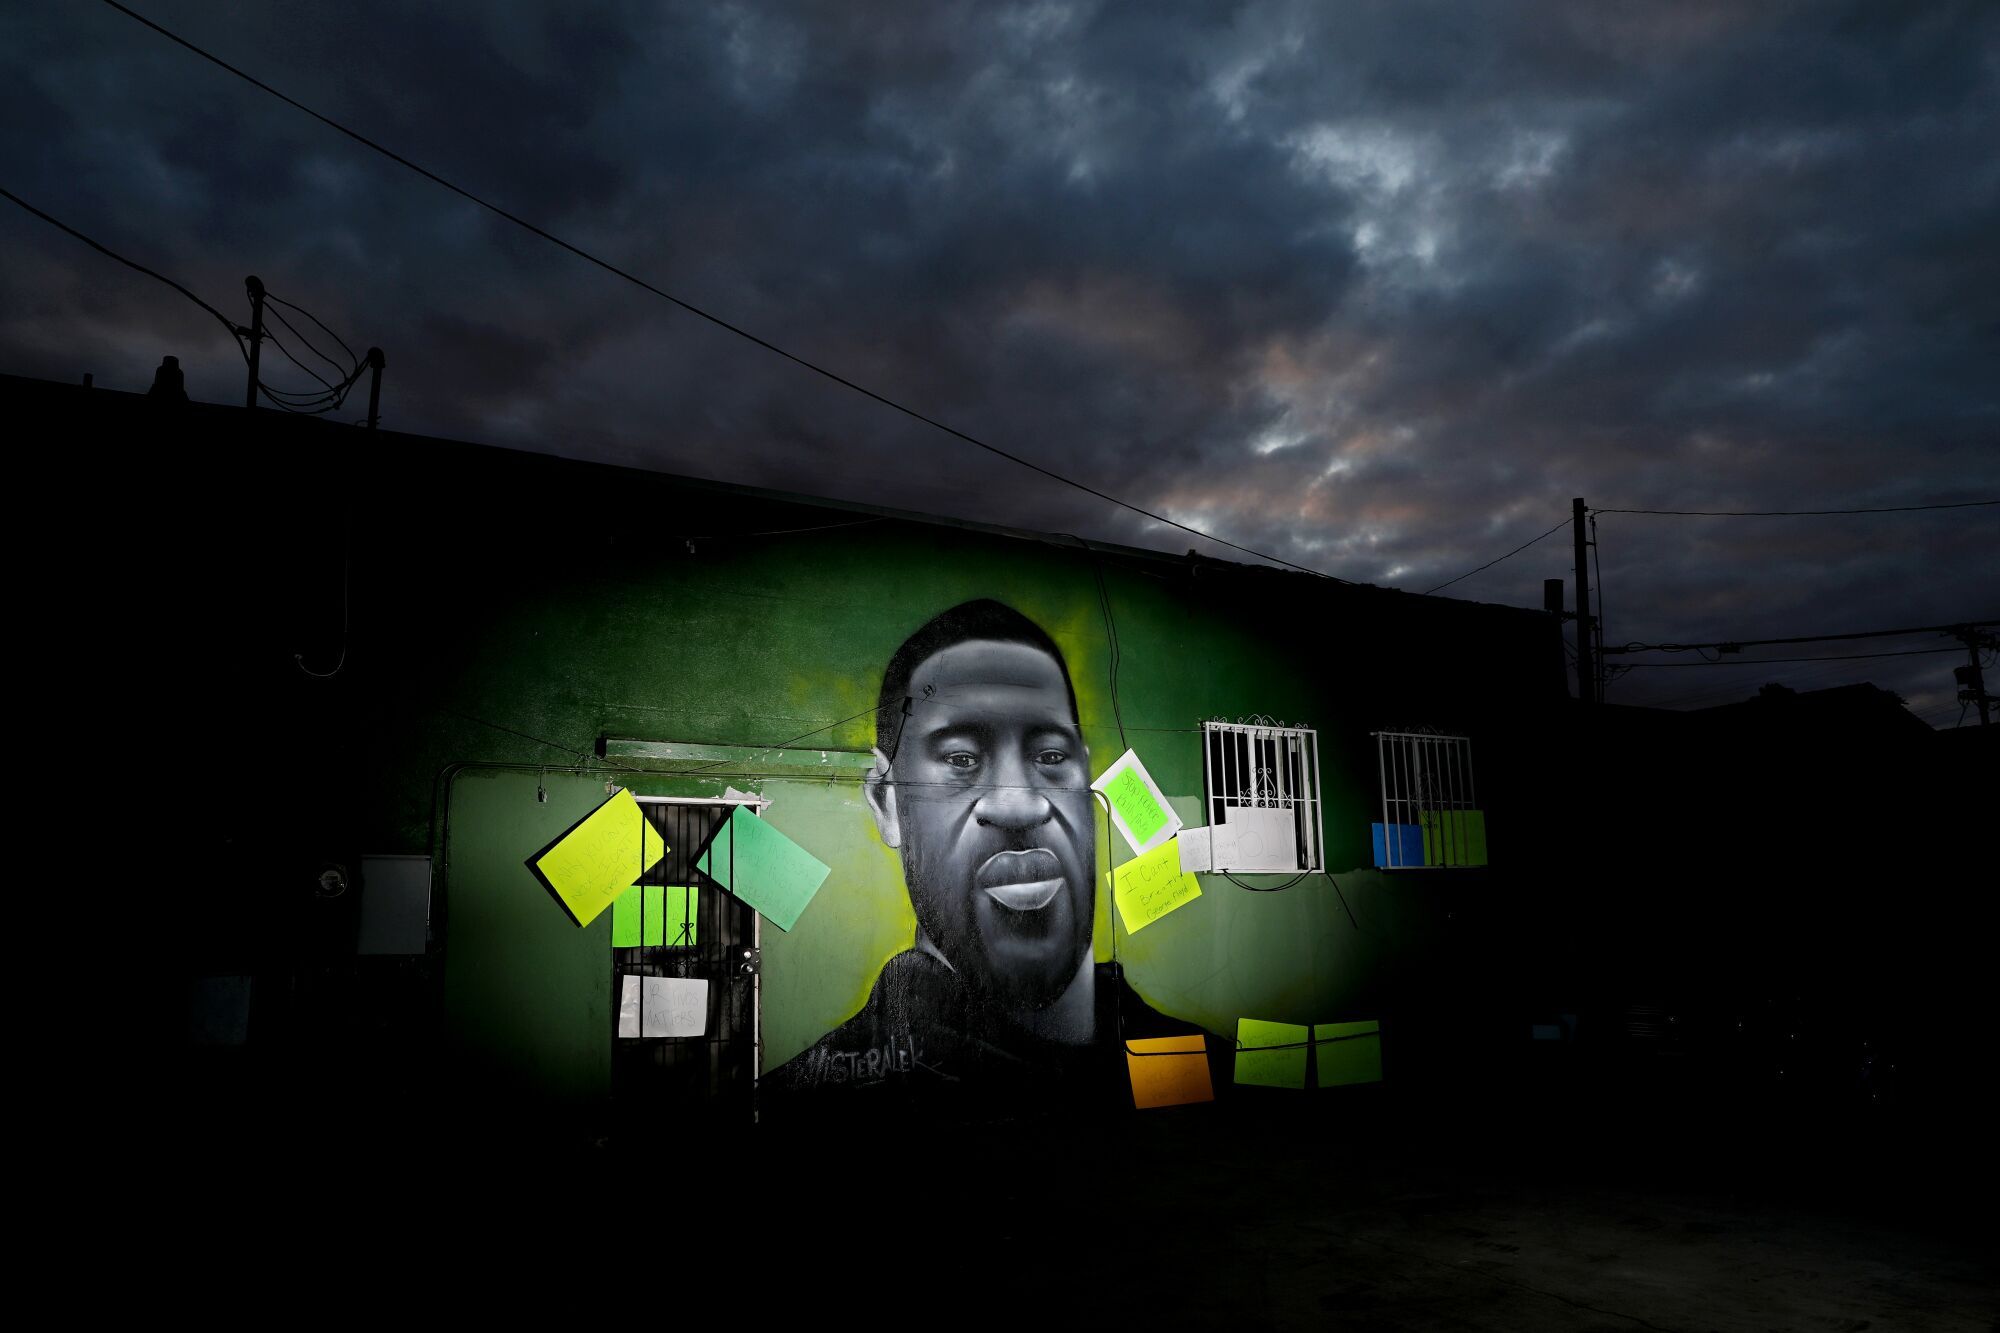 A mural of George Floyd by artist Misteralek is seen at dusk at Wilmington Avenue and 105th Street in Watts.